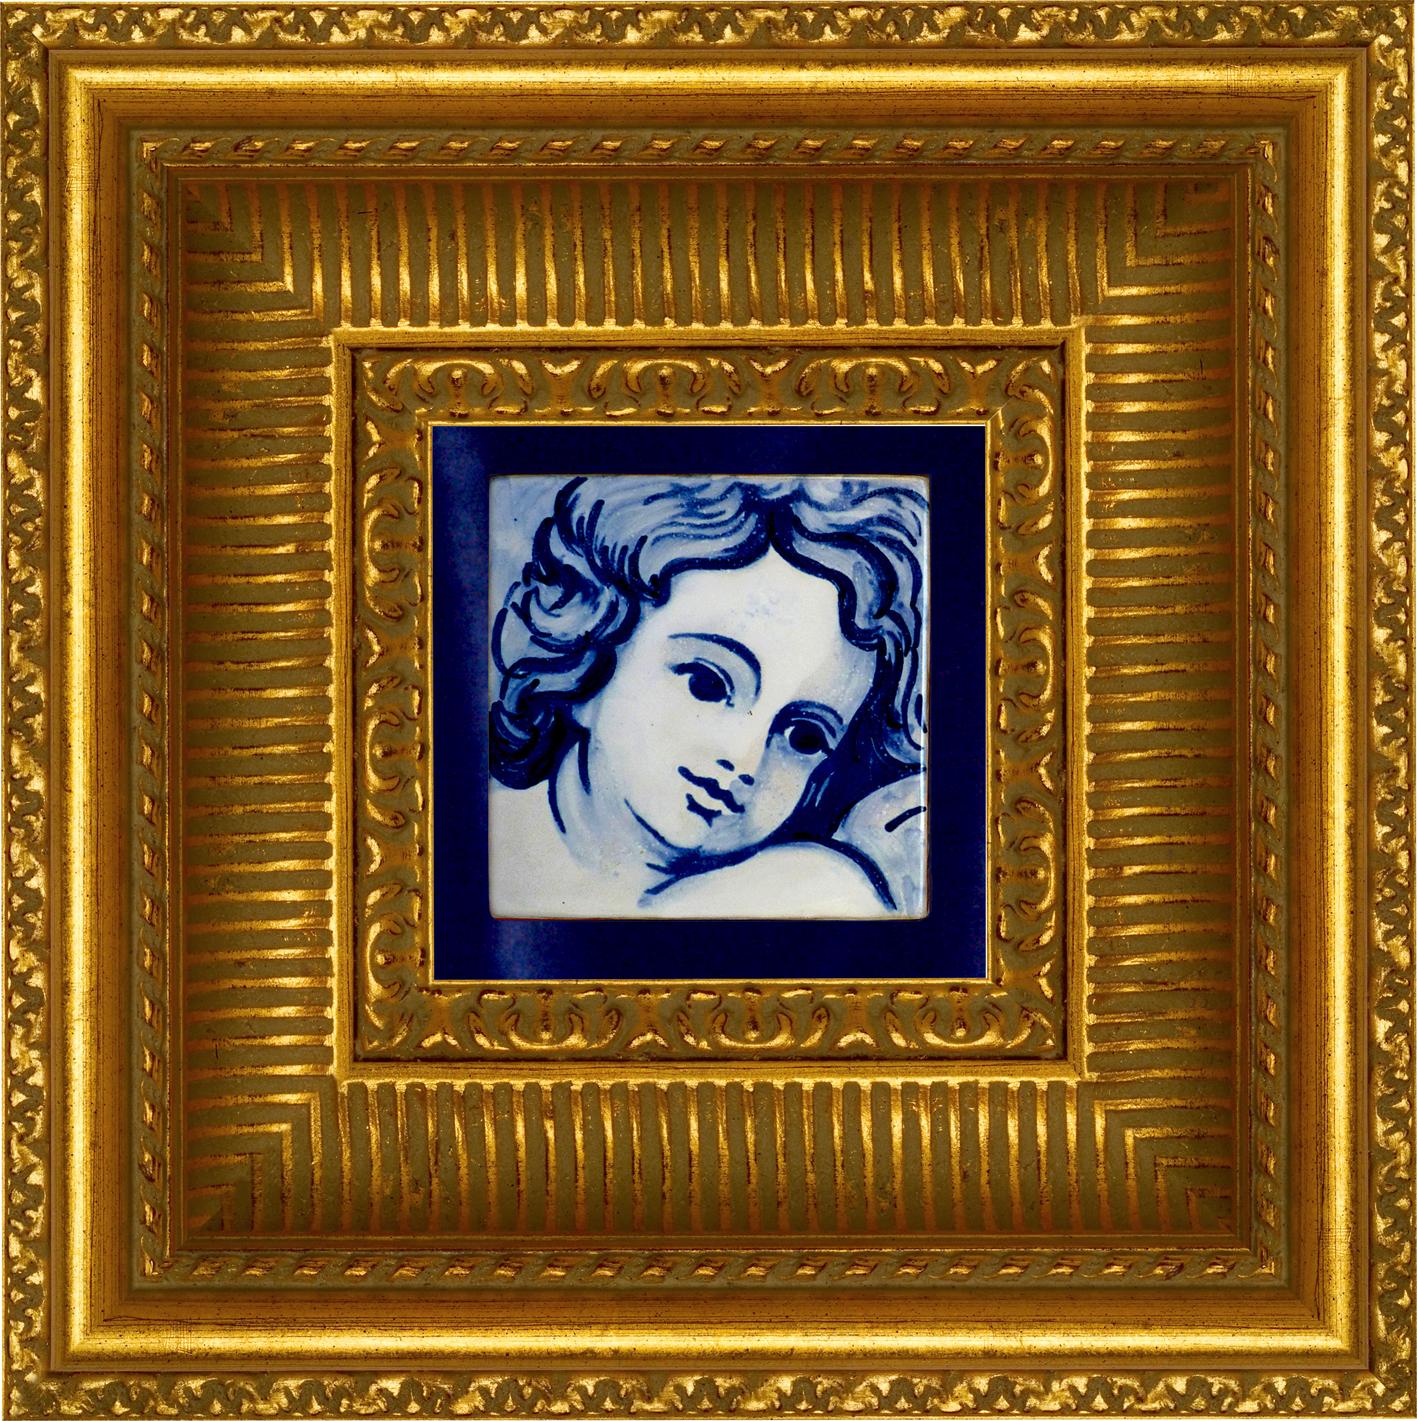 Gorgeous blue hand-painted Baroque cherub or angel 18th century style Portuguese ceramic tile/azulejo.
The tile painted in cobalt blue over white in typical 18th century Portugal set the taste for monumental ceramic tile applications in churches